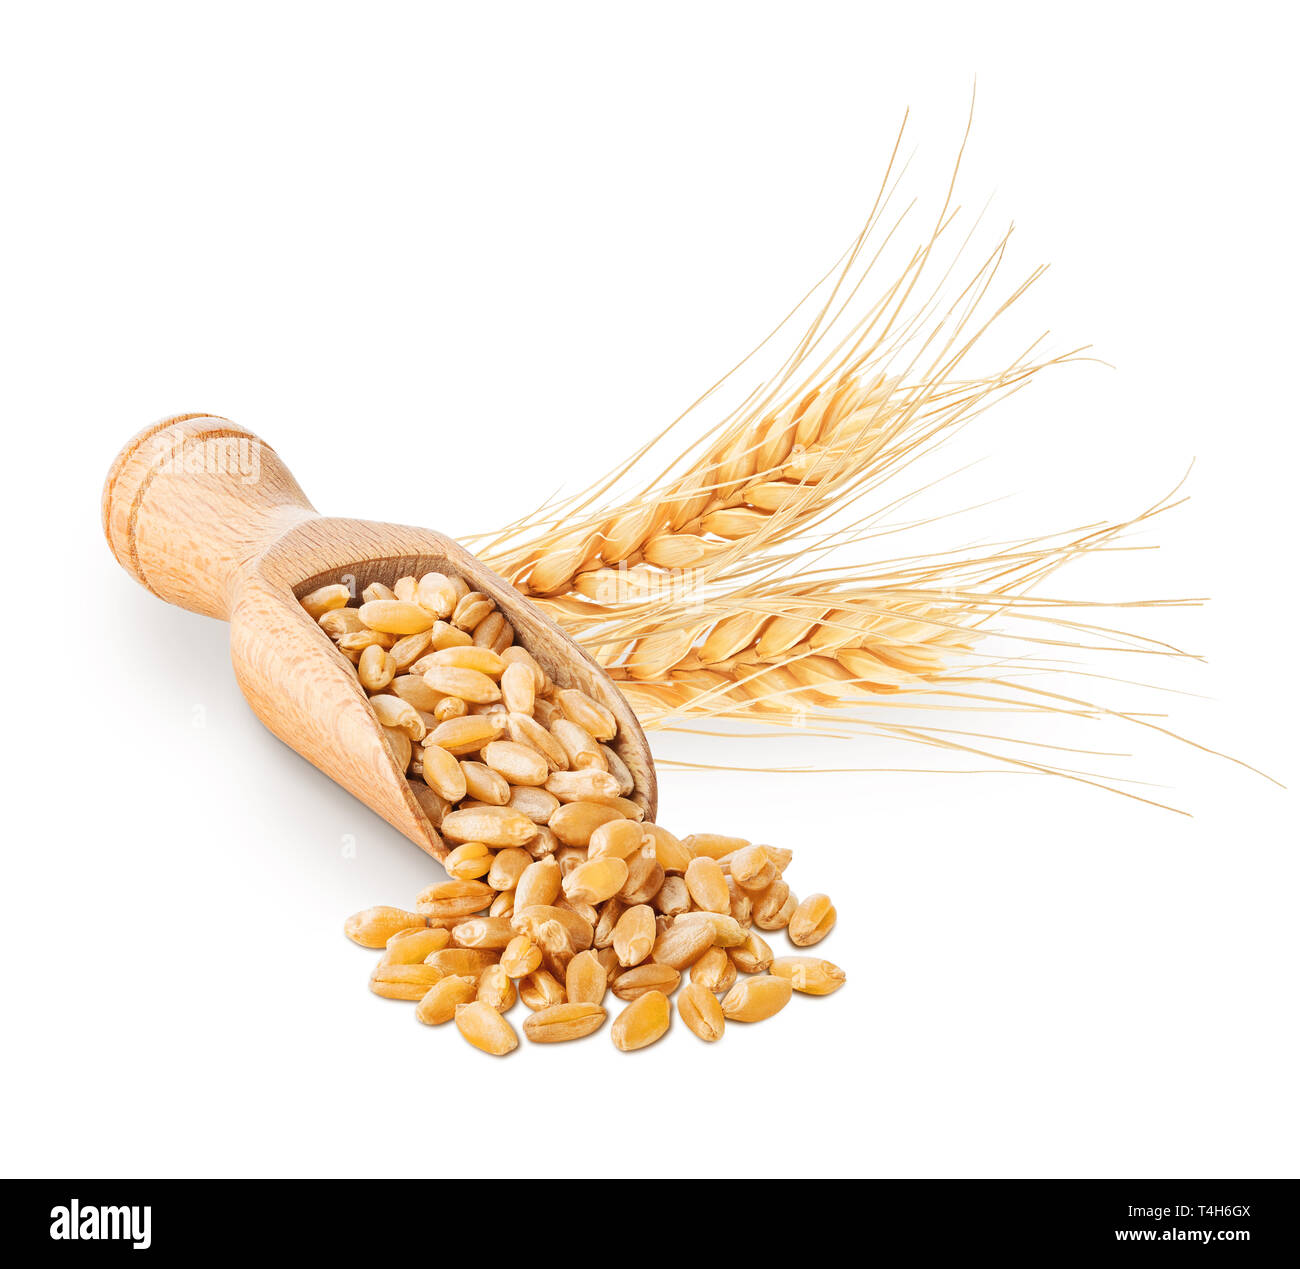 Wheat grains and ears isolated on white Stock Photo